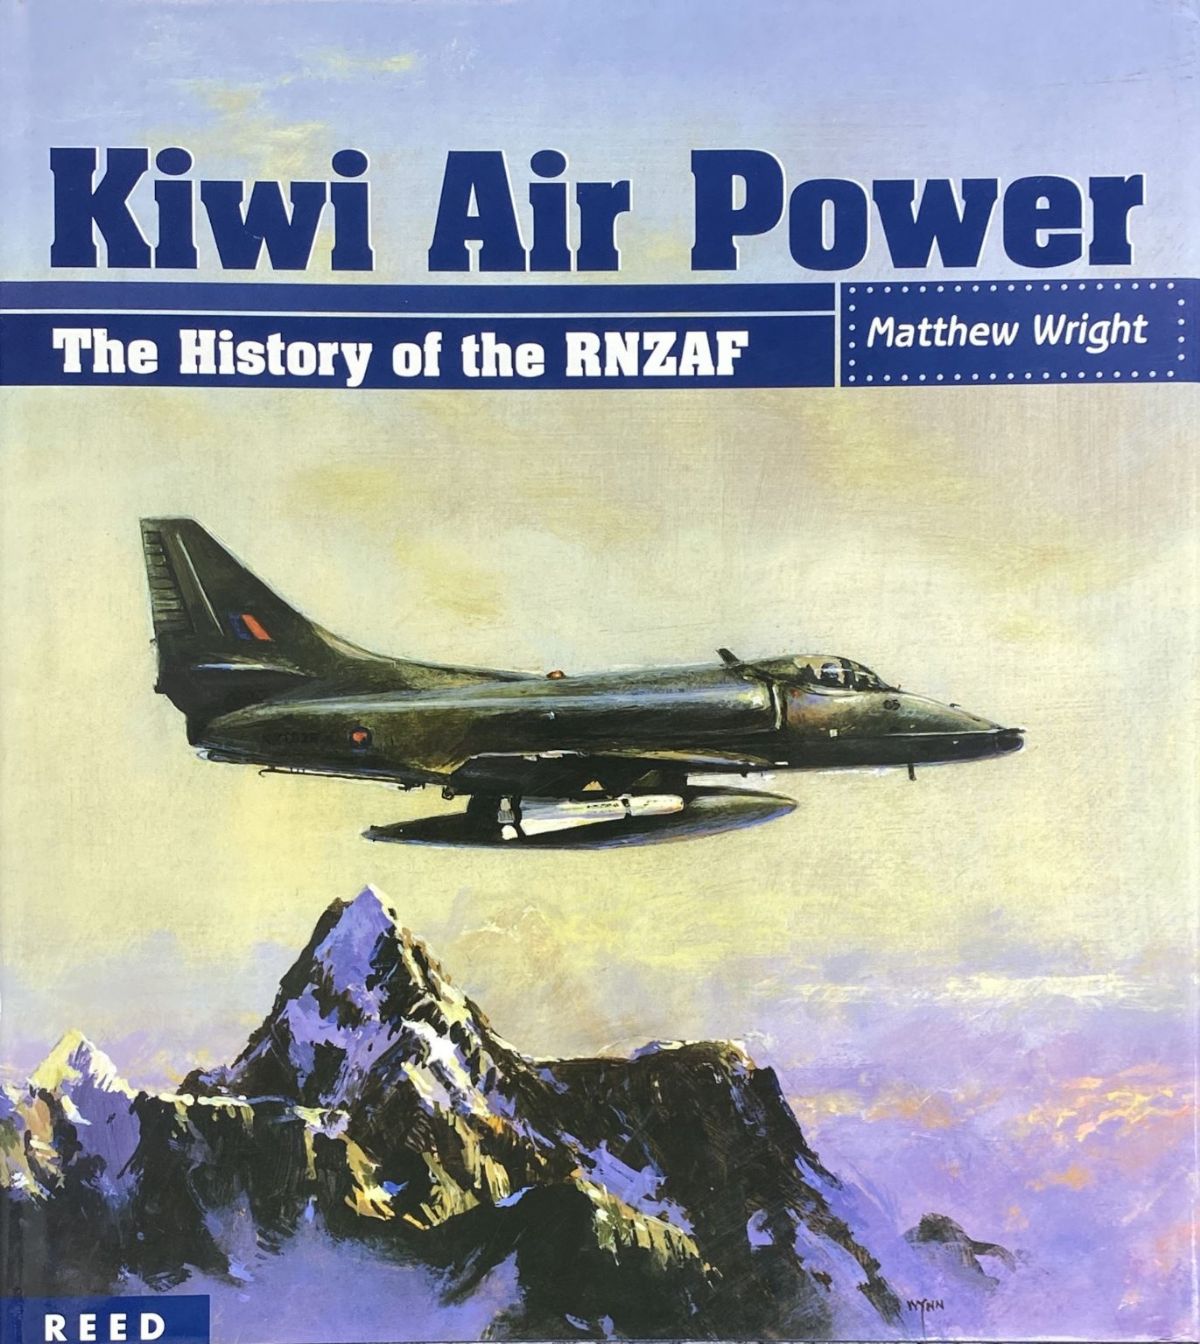 KIWI AIR POWER: The History of the RNZAF